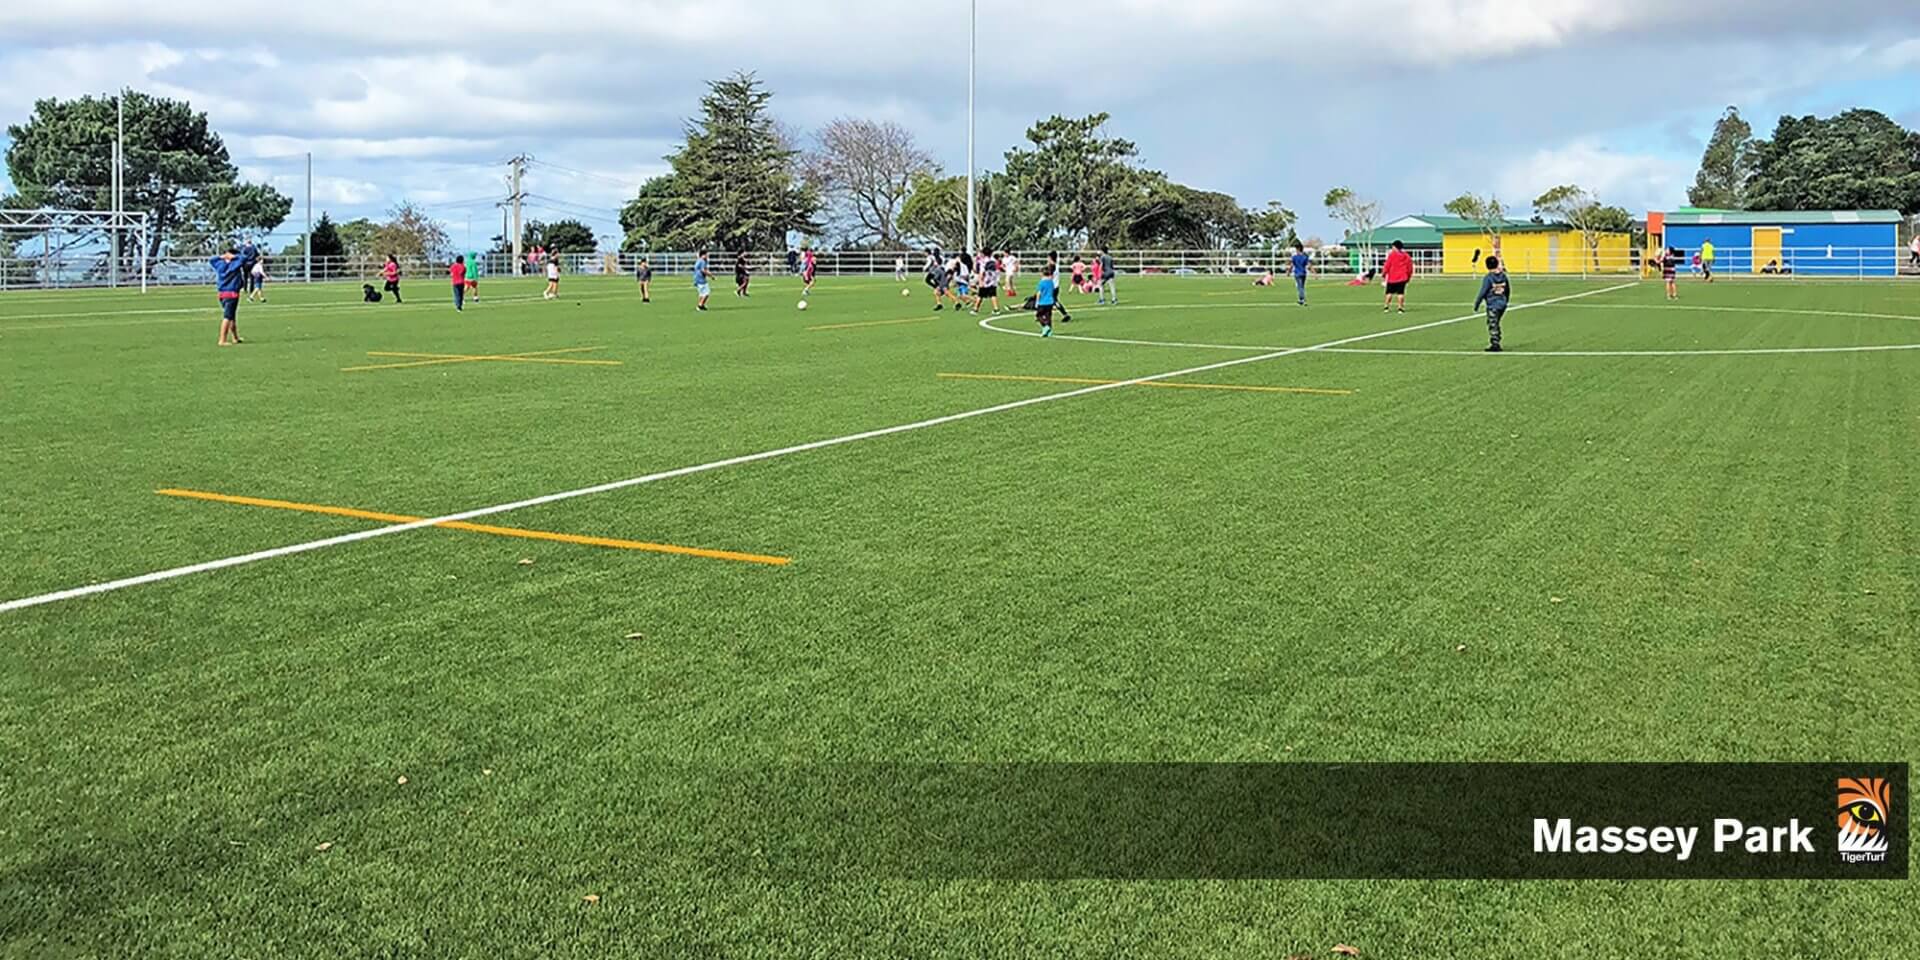 New Massey Park synthetic football turf meets FIFA and World Rugby standards